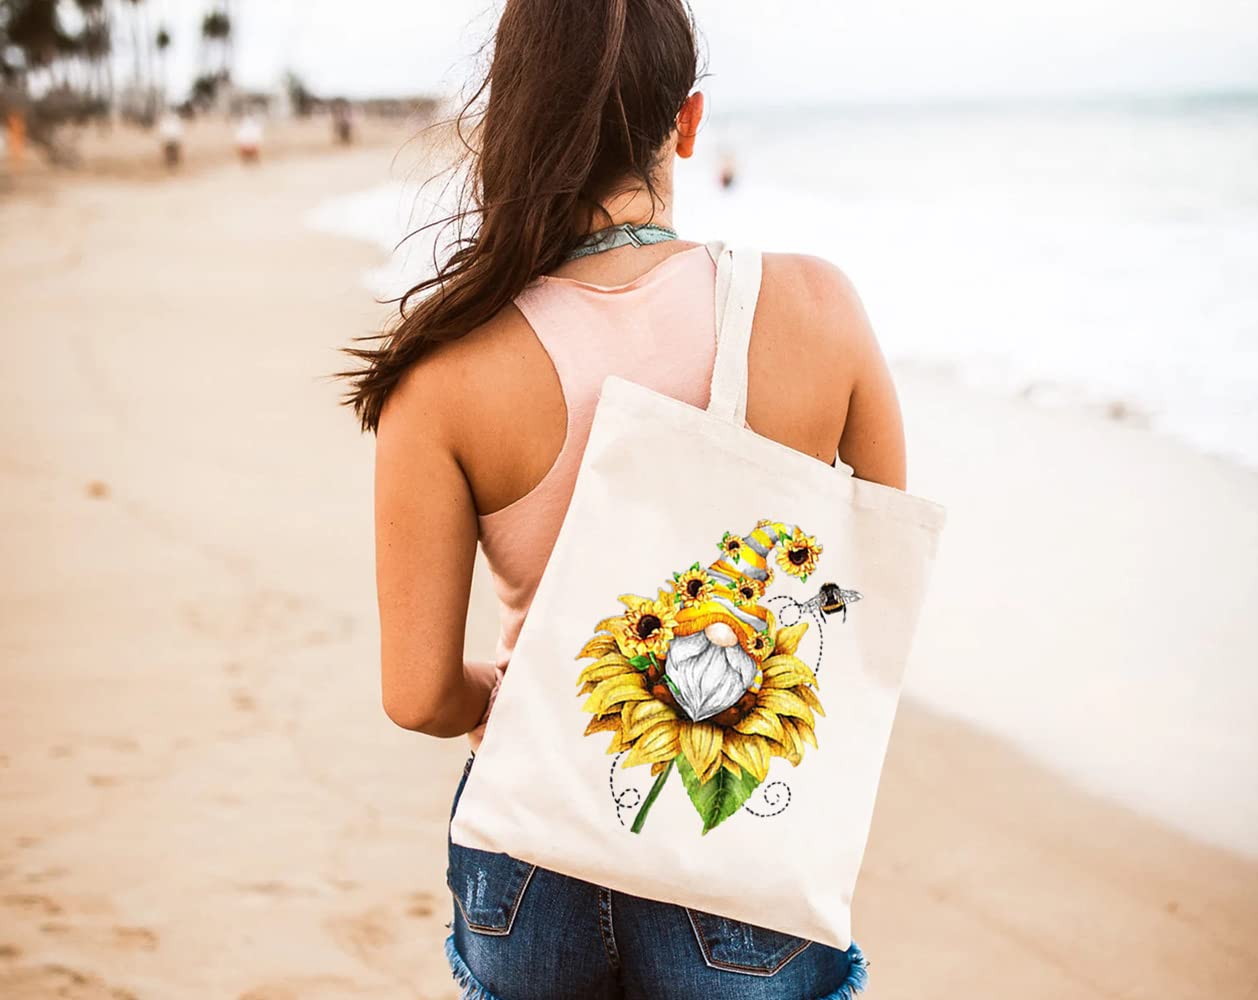 GXVUIS Canvas Tote Bag for Women Aesthetic Sunflower Gnome Reusable Grocery Shoulder Shopping Bags Girls Gifts White